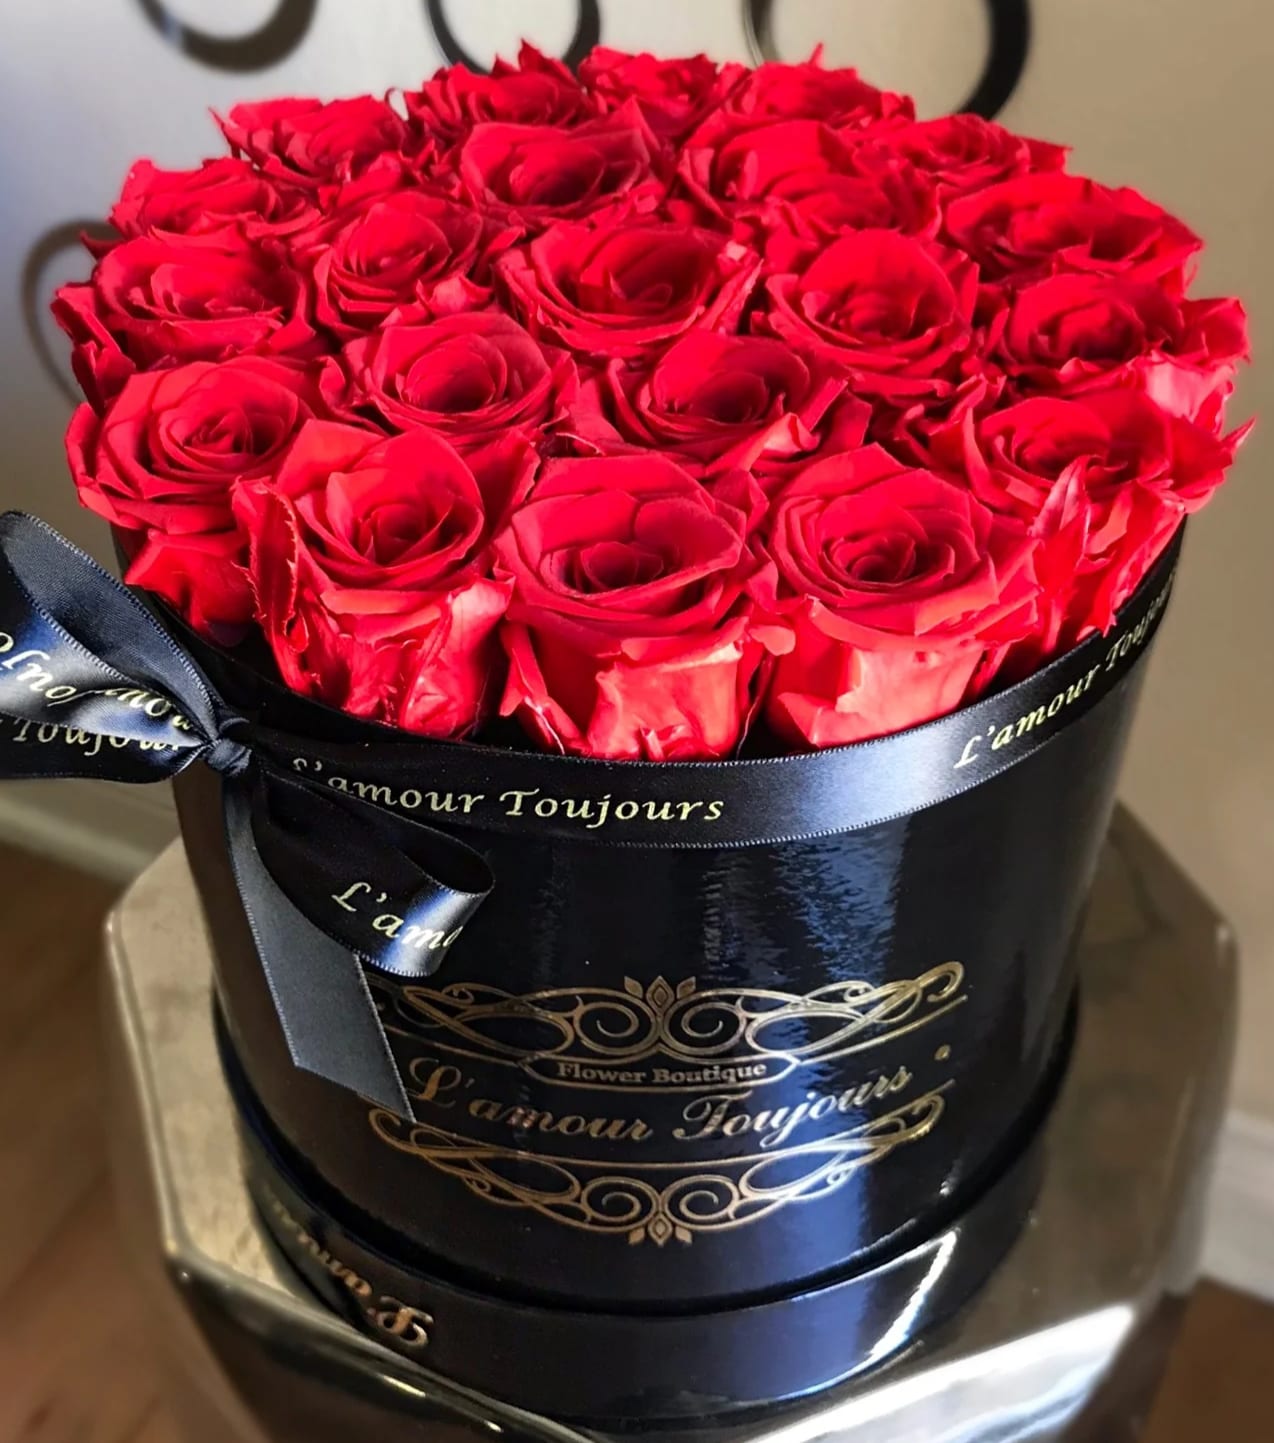 Everlasting Red Signature Box - Real Roses that last up to 3 years